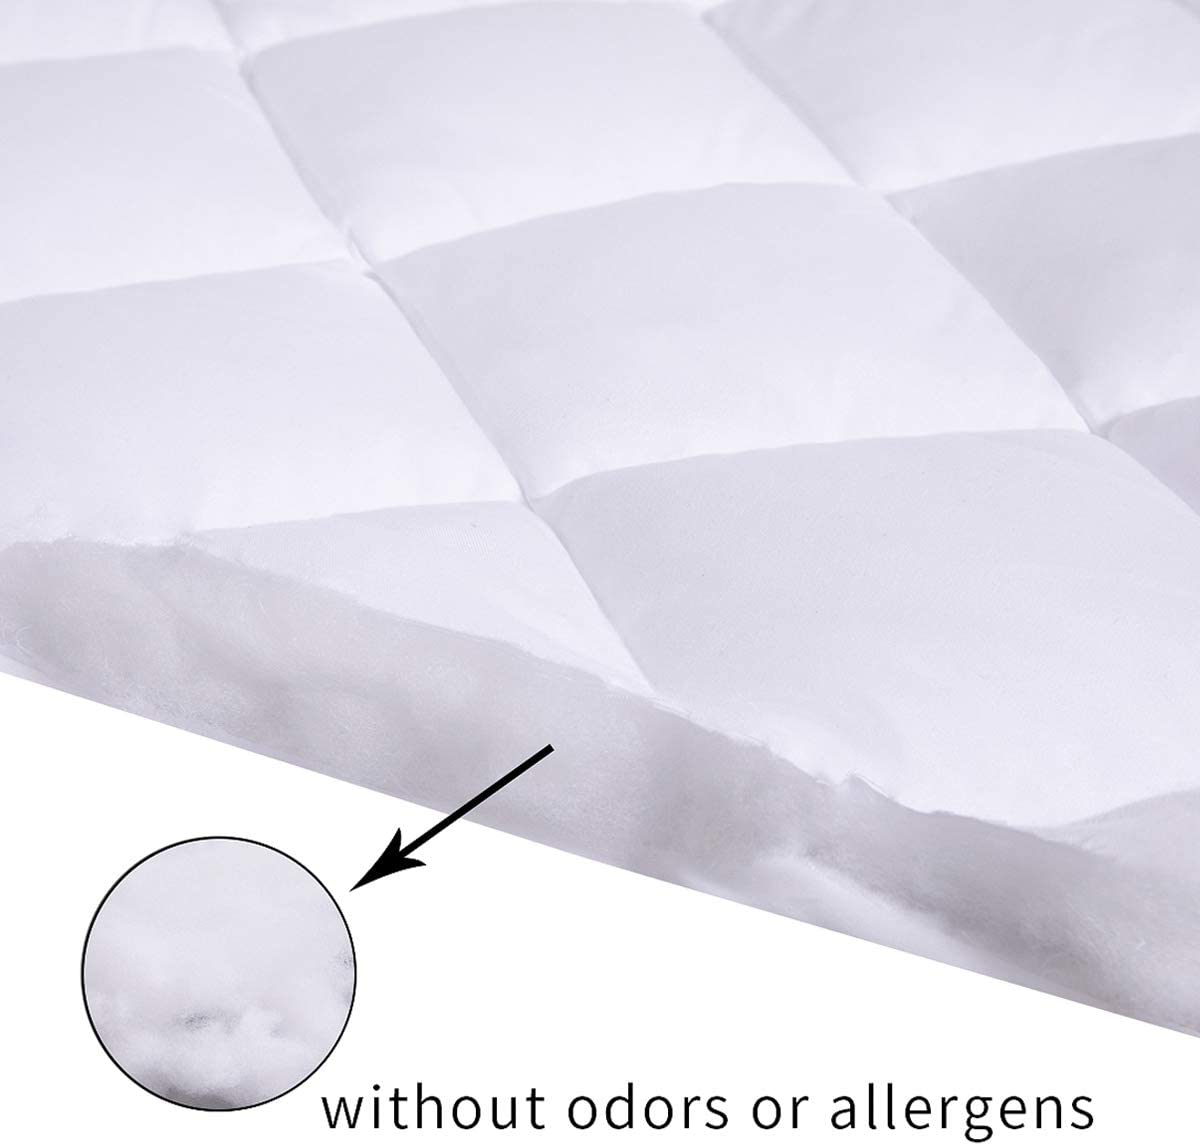 EcoMozz Full Mattress Pad Stretches up to 8-21Inch Smooth Elastic Pocket(Without Noise) Premium Snow Alternative Fiber Fill Protection Pad